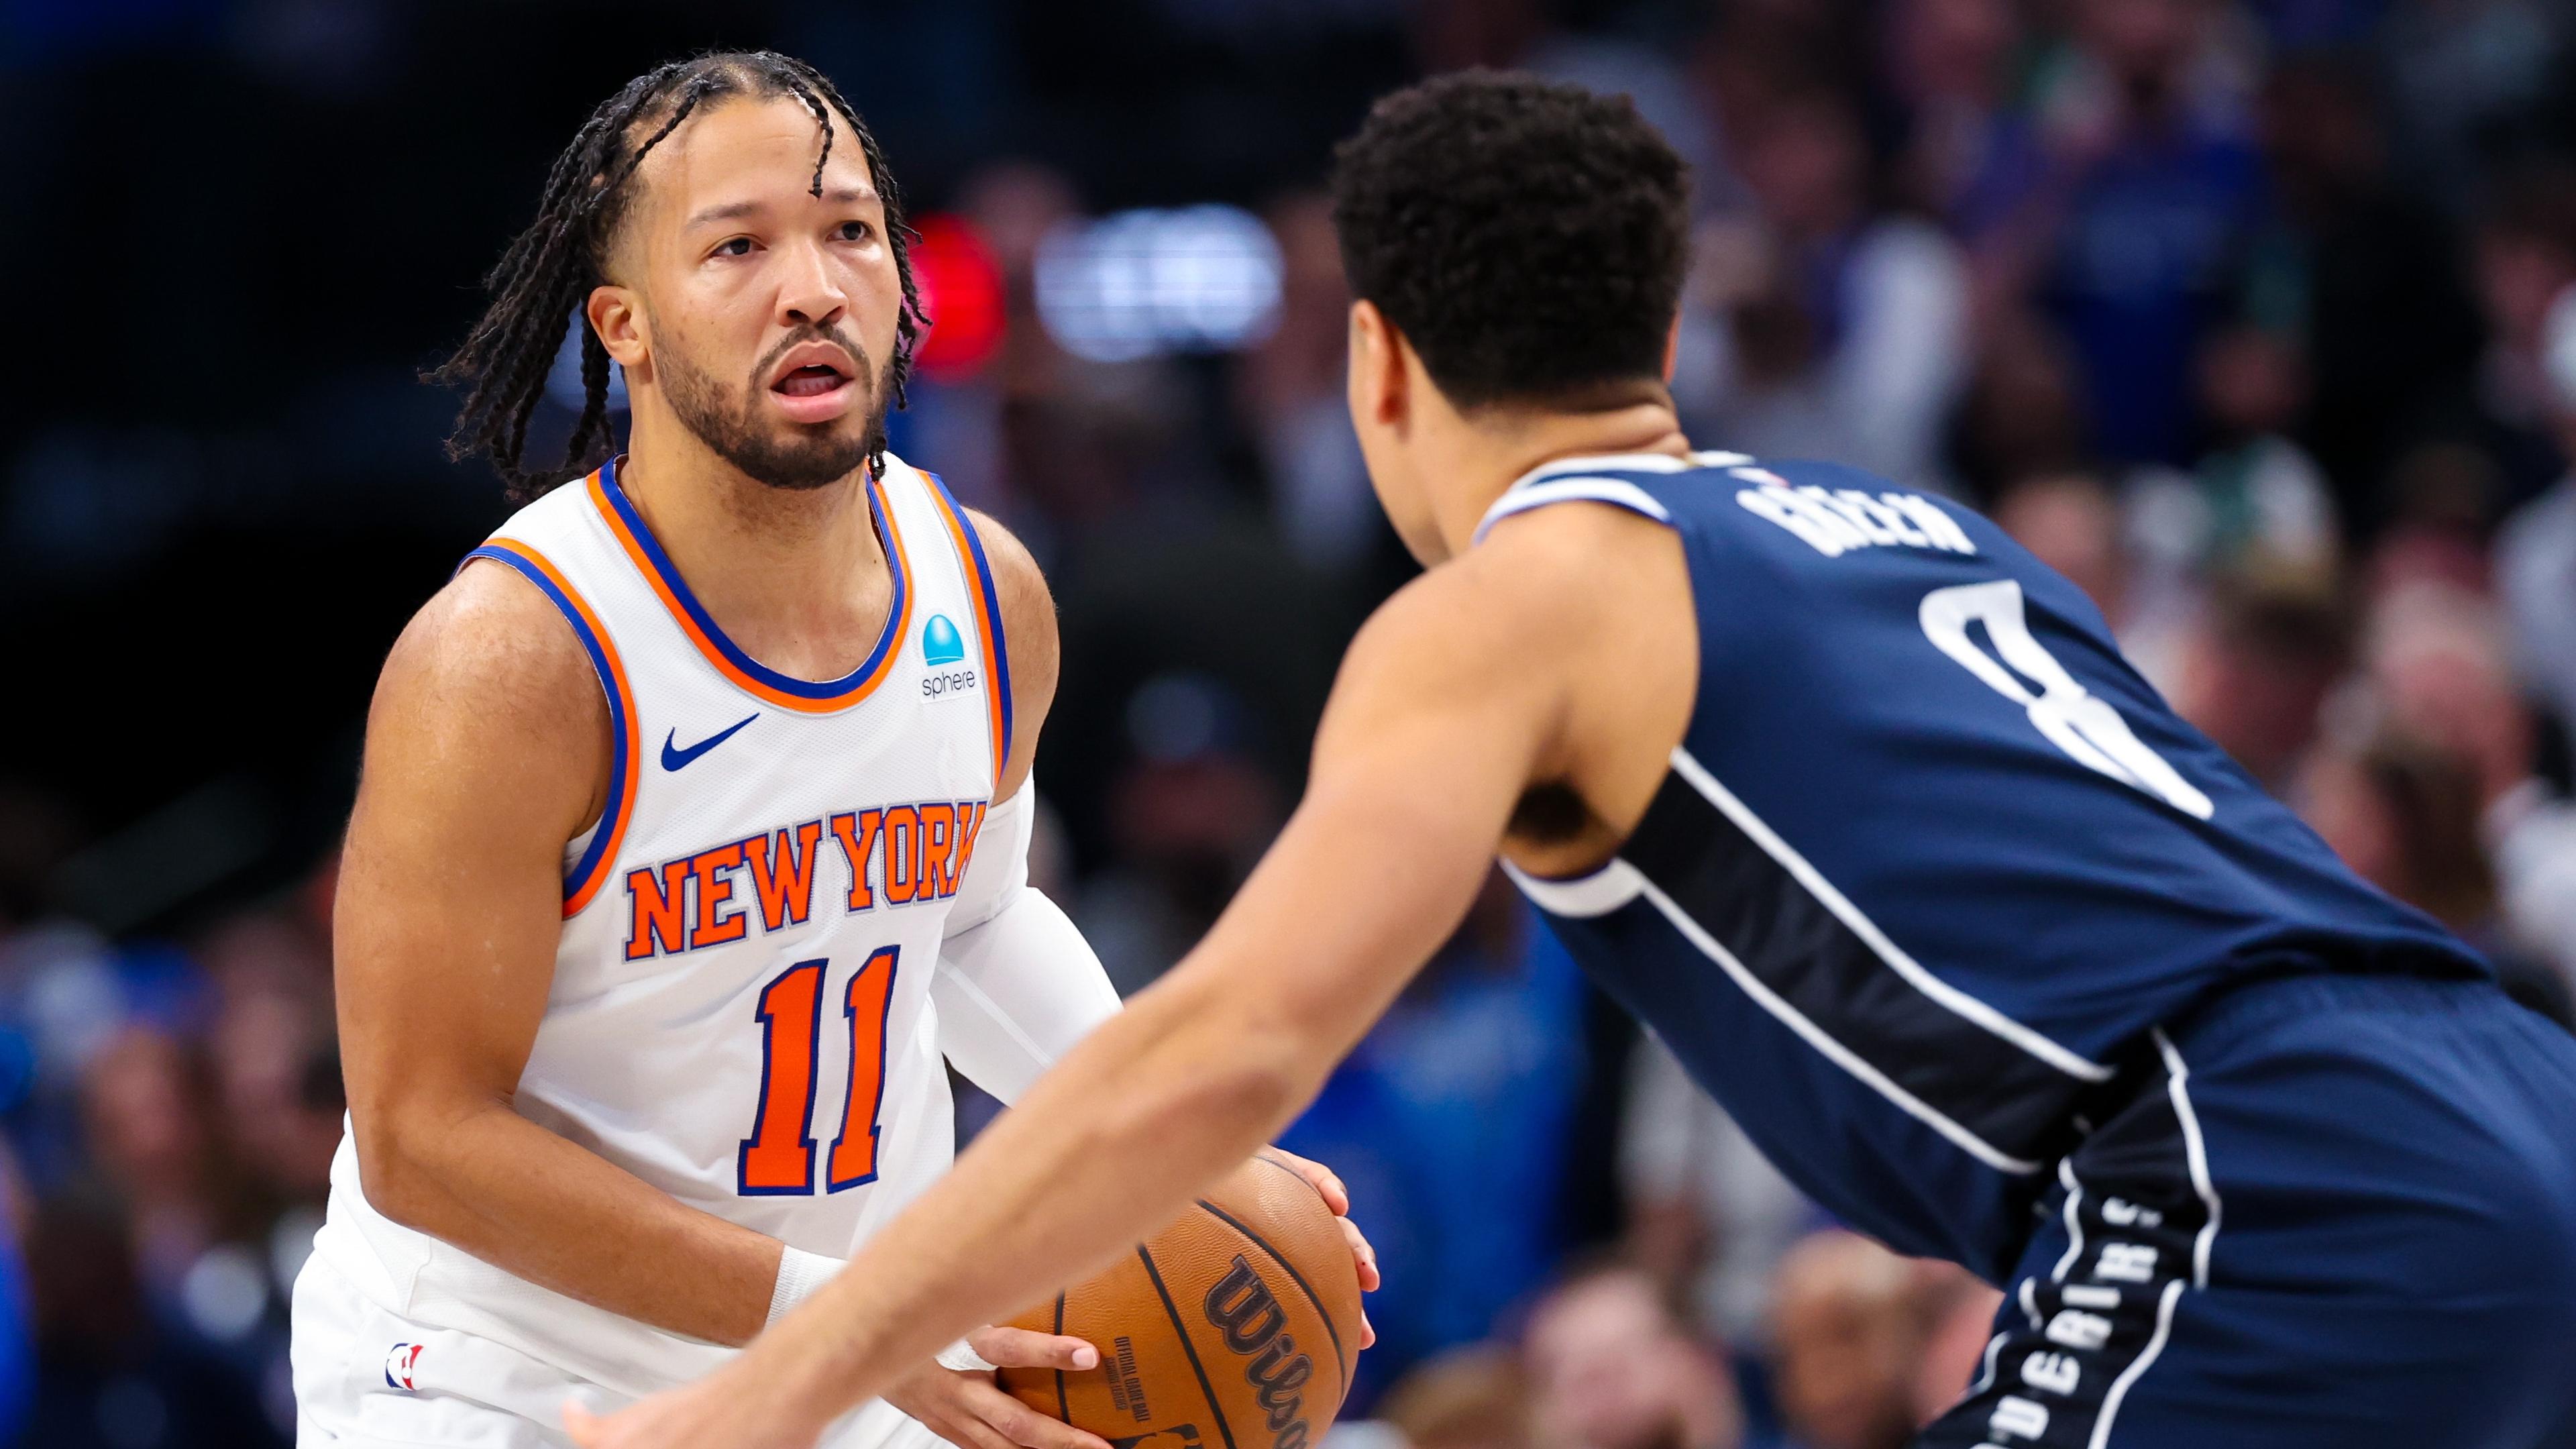 New York Knicks guard Jalen Brunson (11) looks to pass as Dallas Mavericks guard Josh Green (8) defends during the first quarter at American Airlines Center / Kevin Jairaj - USA TODAY Sports